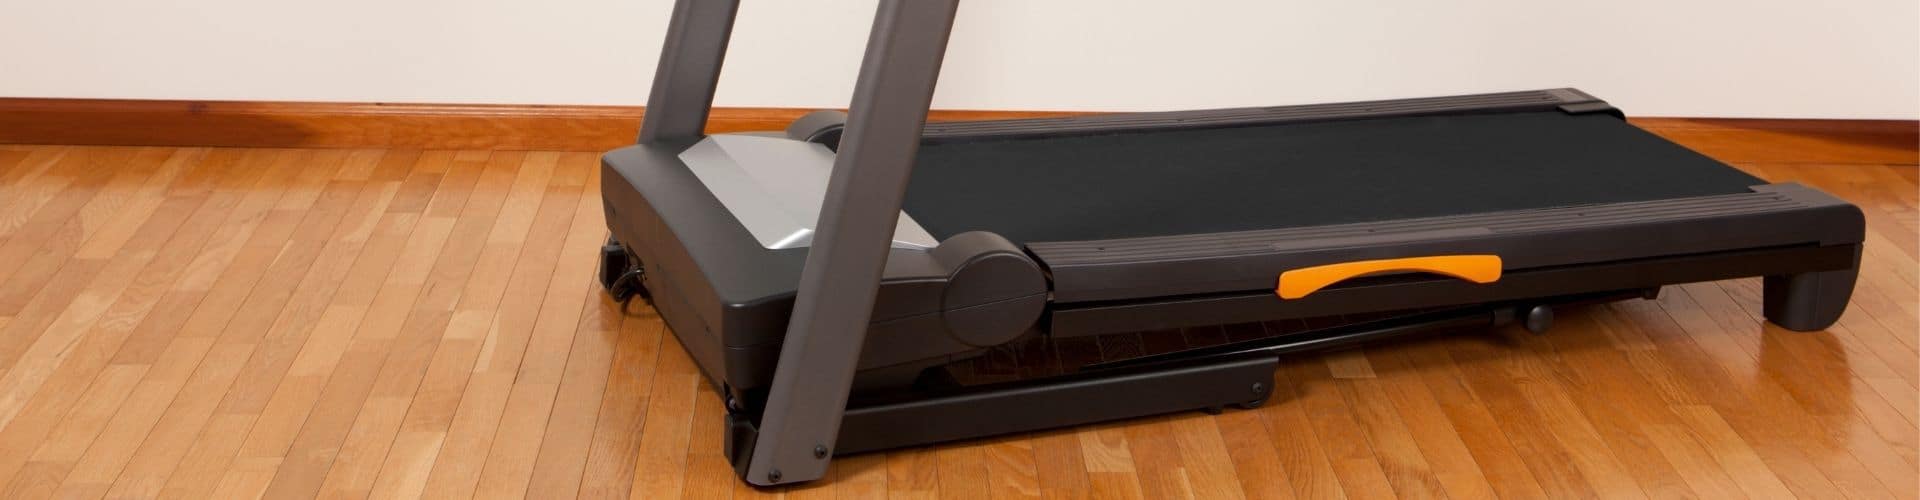 best small treadmill for apartment